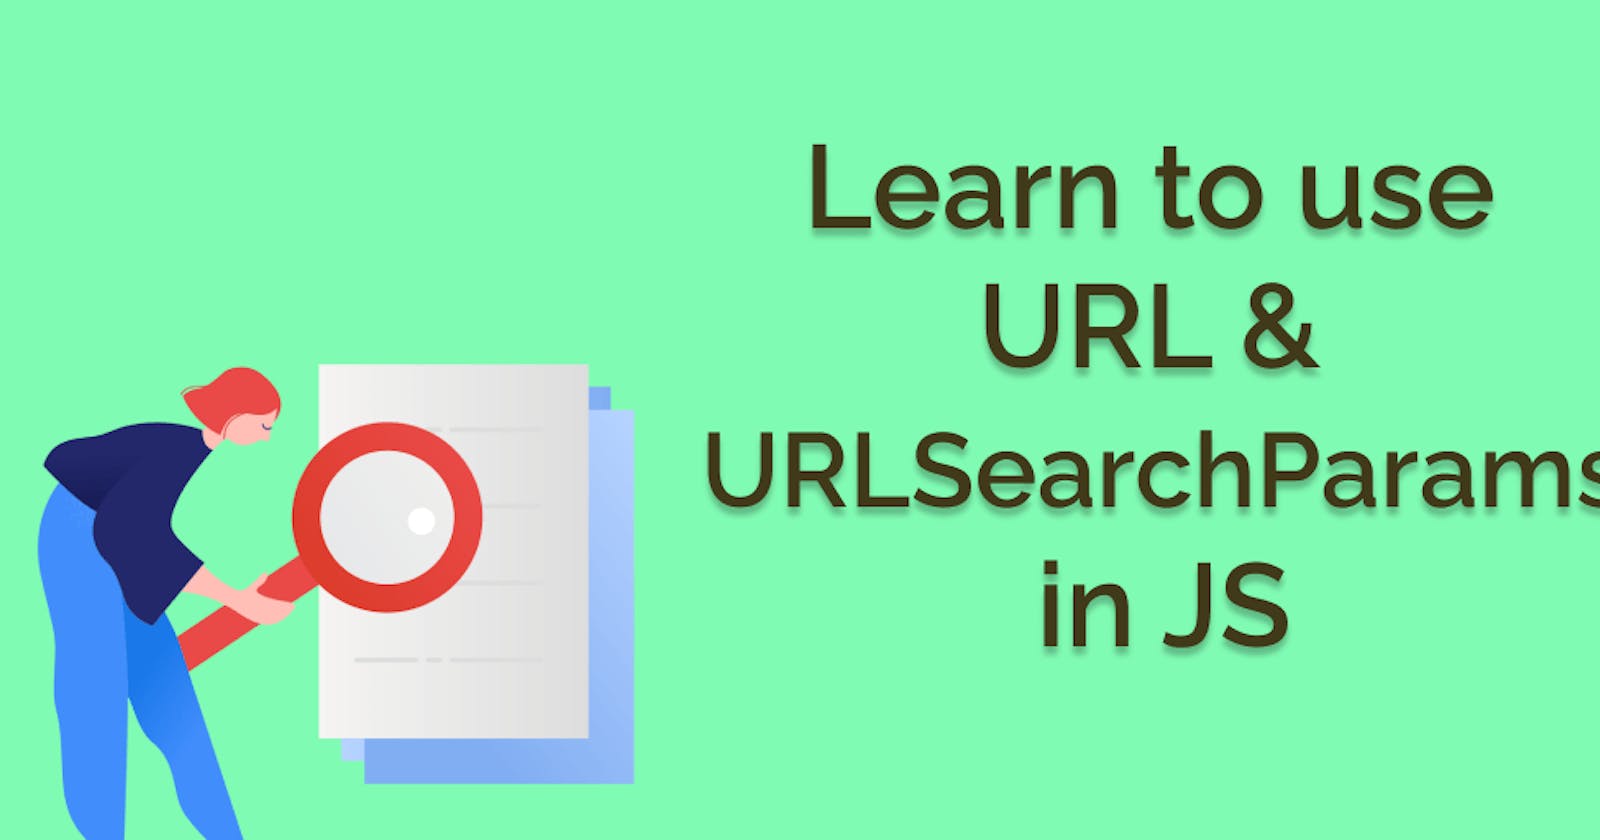 Why do you need just URL() API to get query params of a URL?